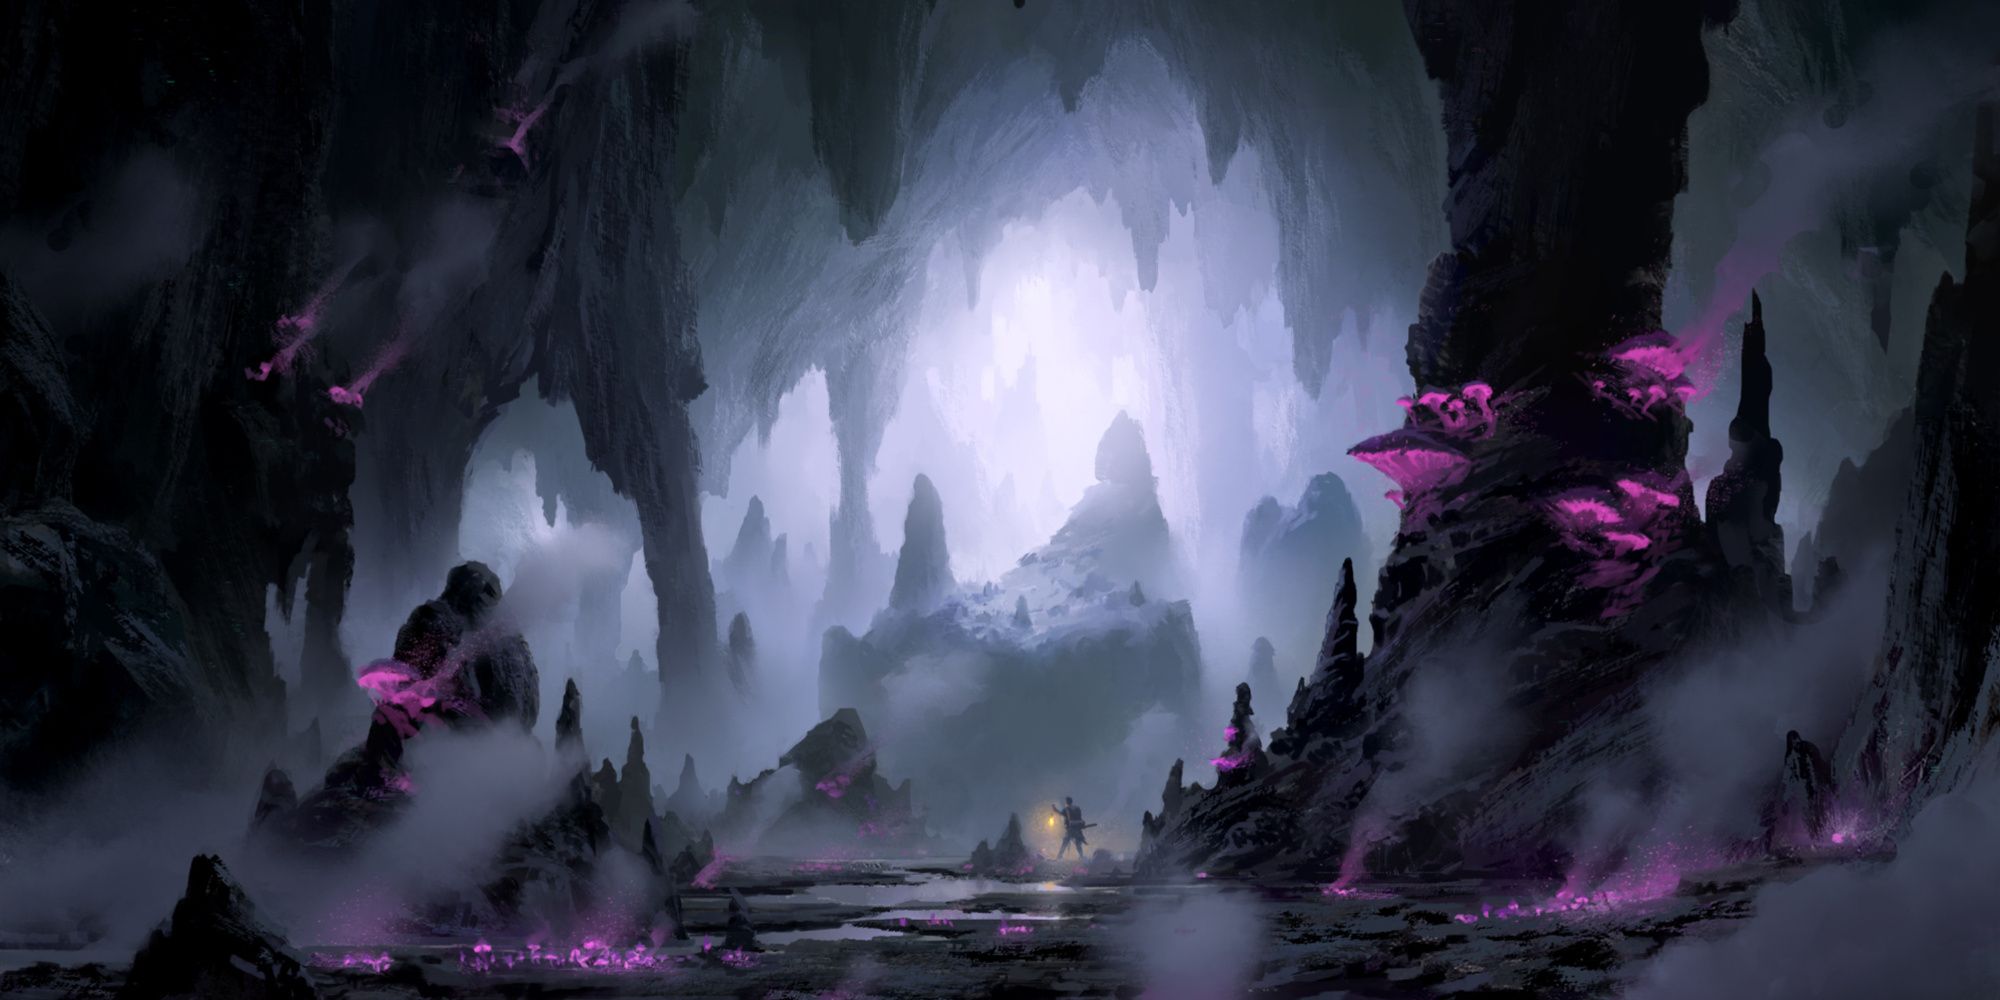 Forgotten realms swamp cave with glowing purple mushrooms Swamp by Piotr Dura